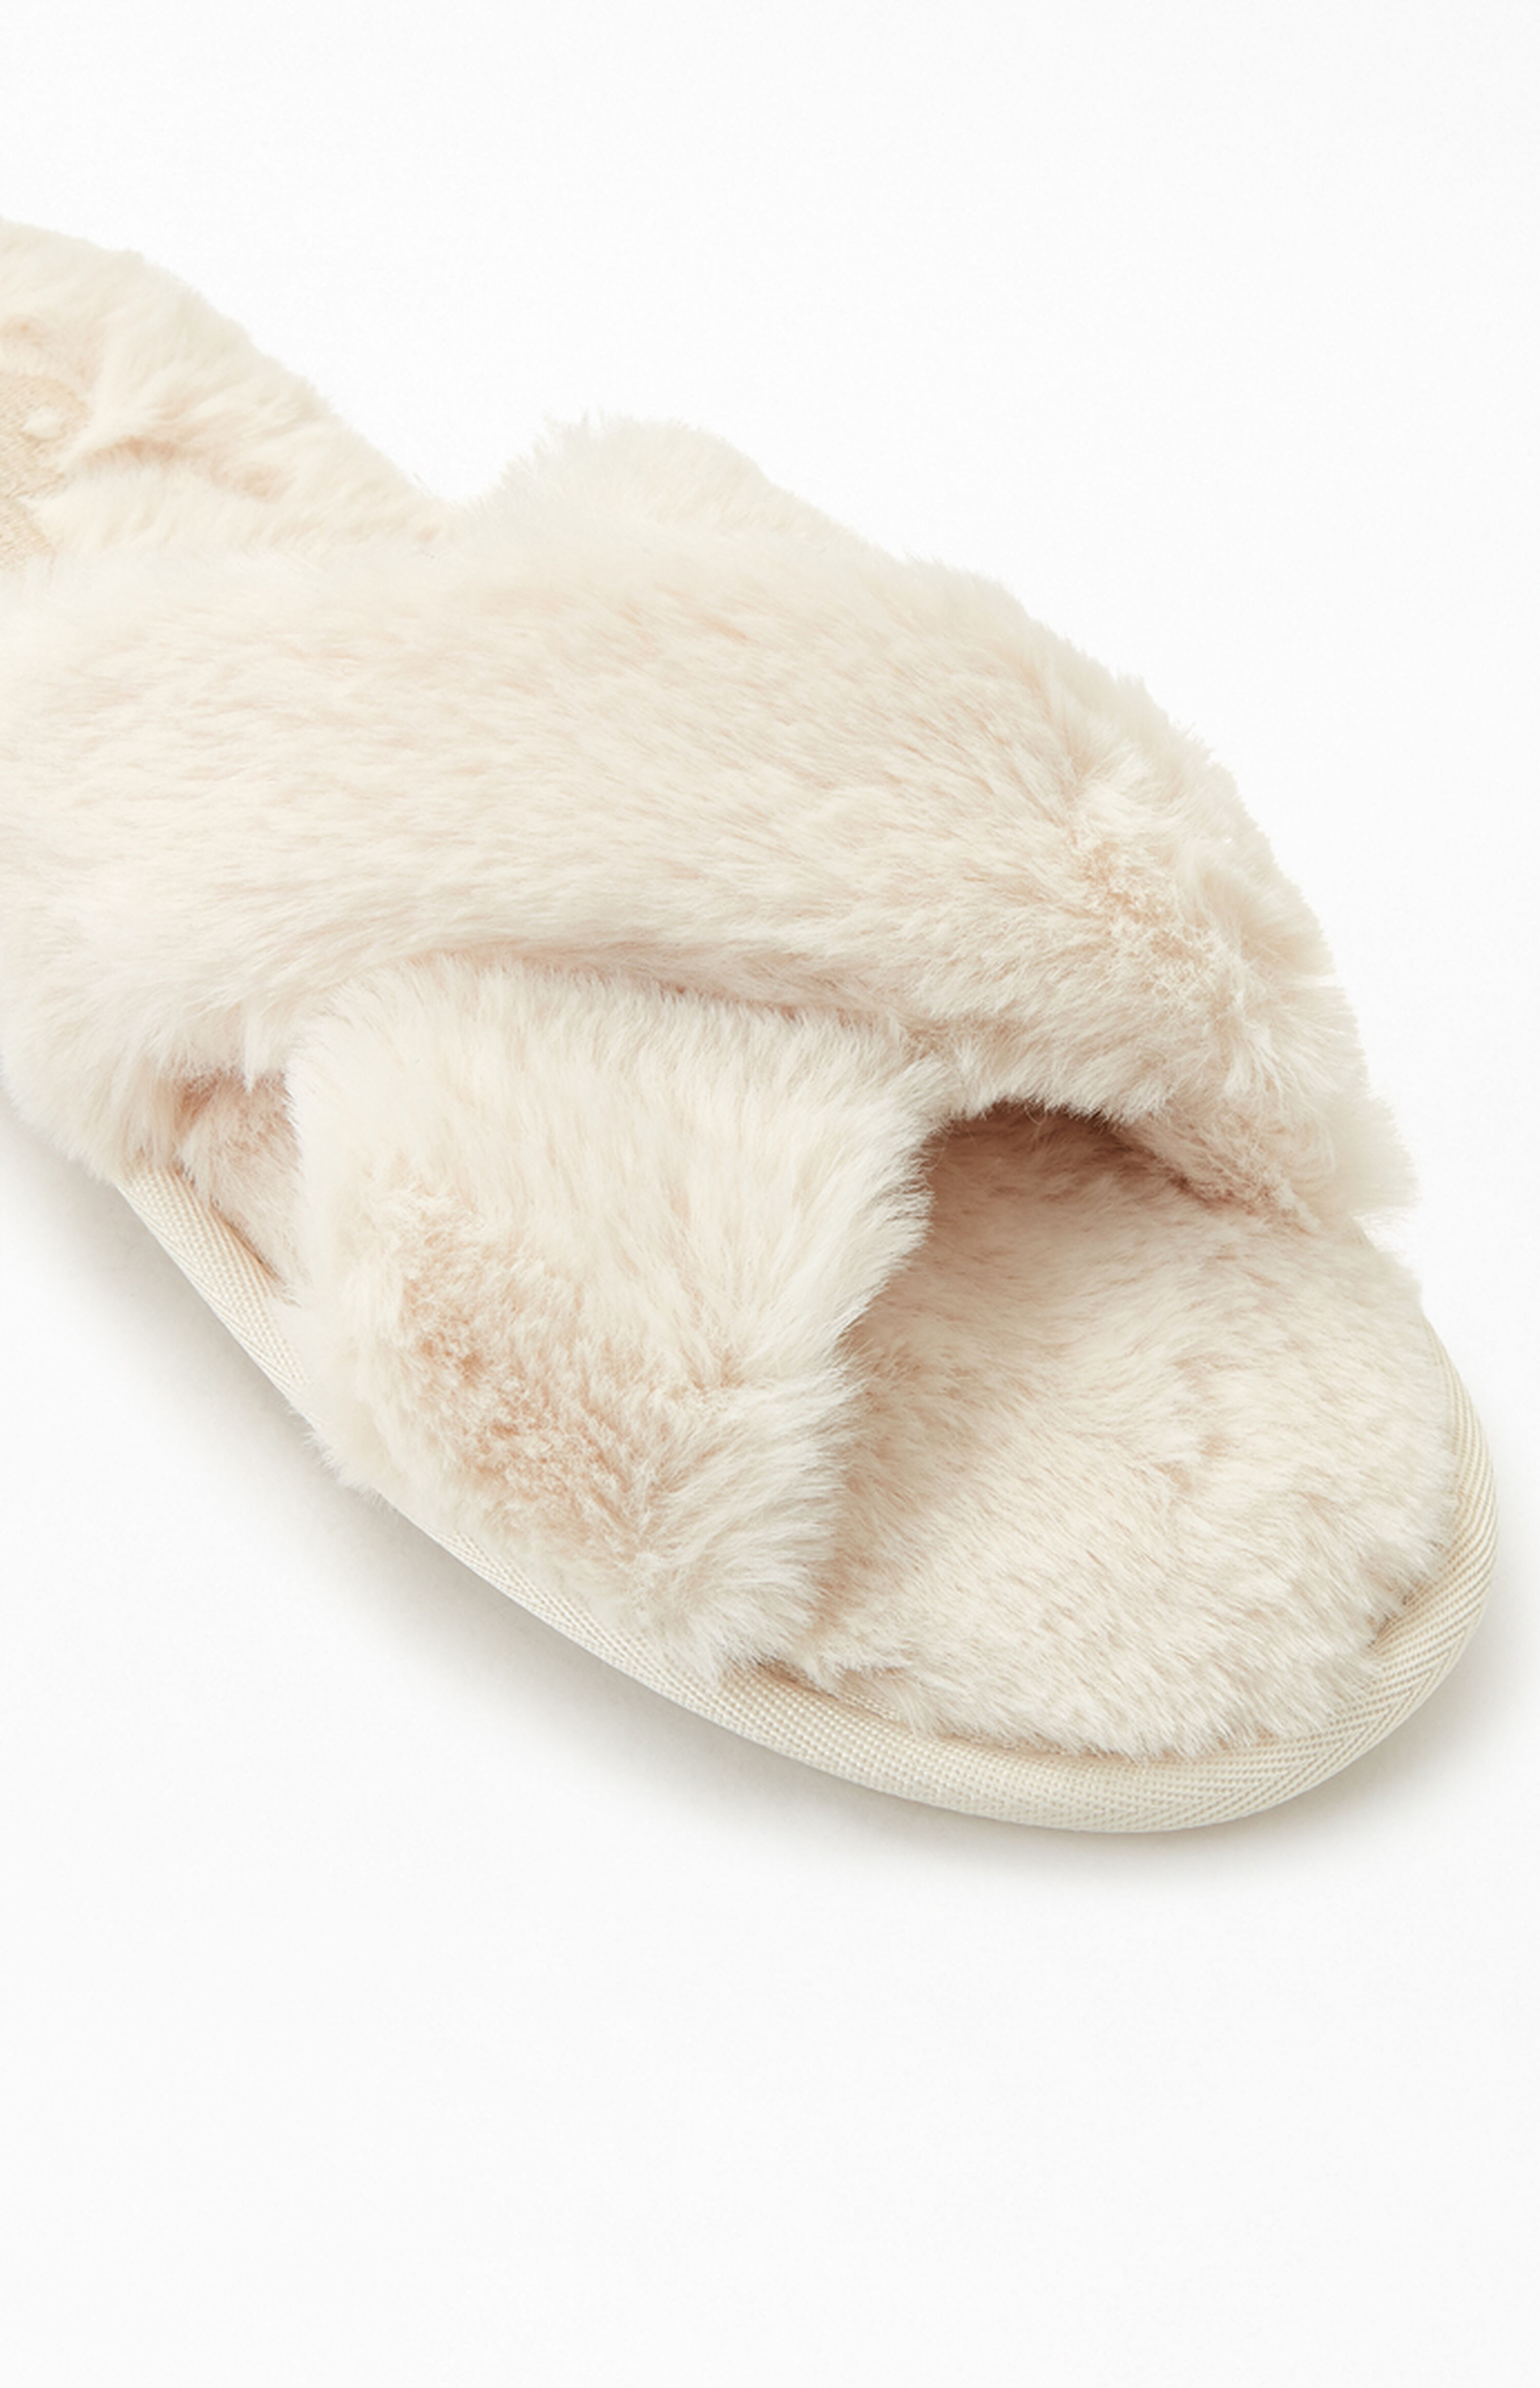 Playboy By PacSun Nude Fuzzy Slippers | PacSun